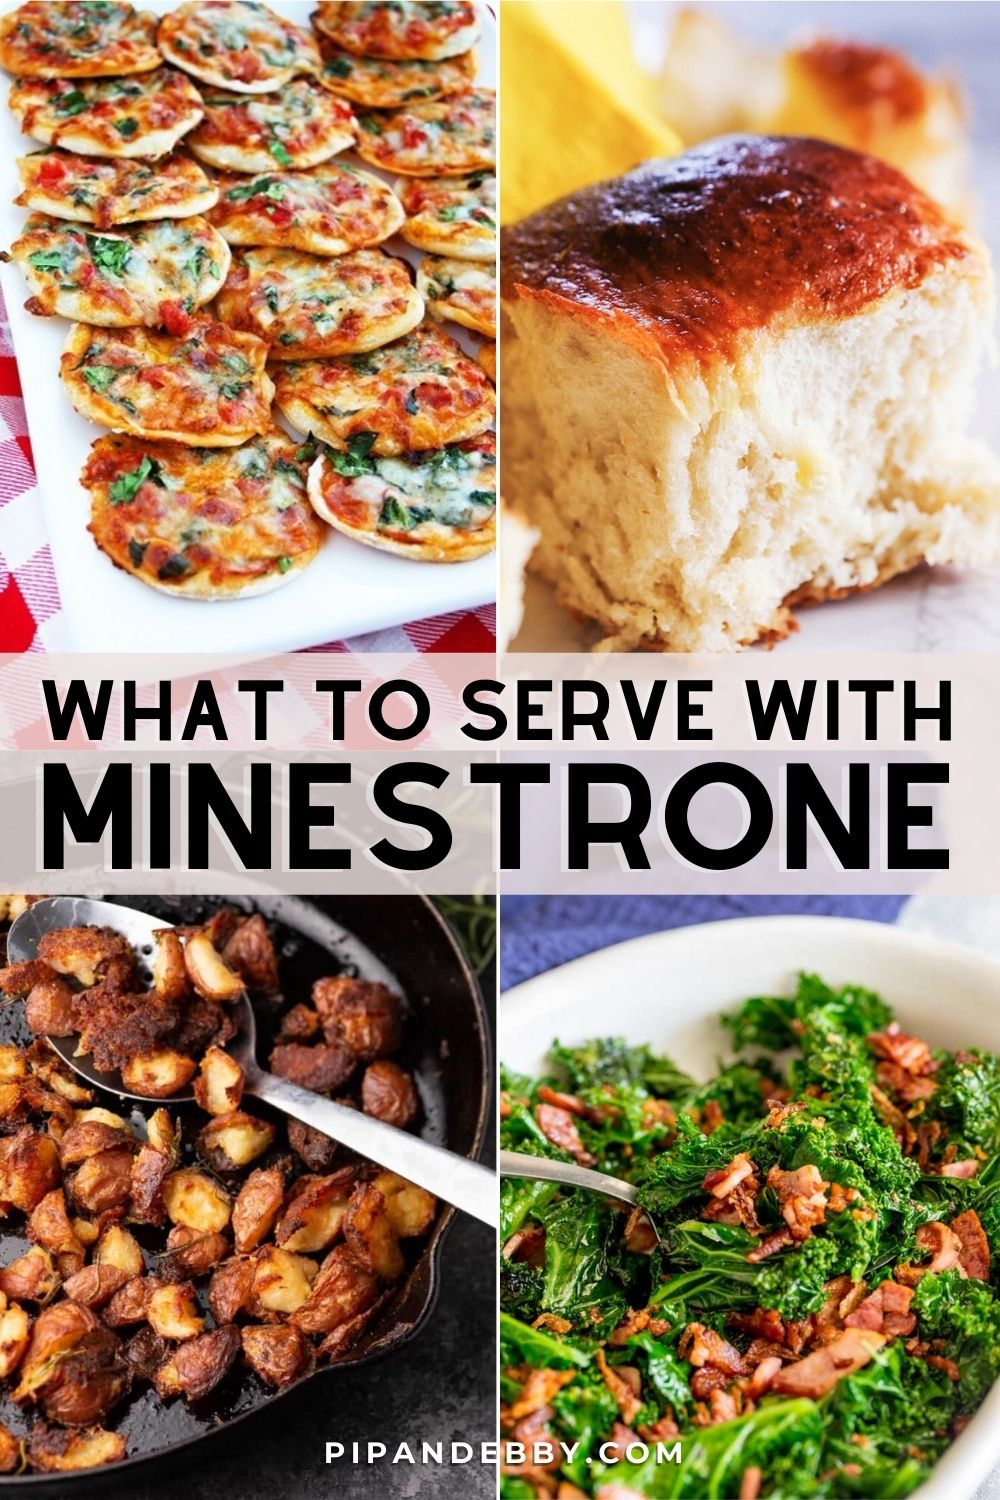 Four photos in a grid with text overlay reading, "What to serve with minestrone."